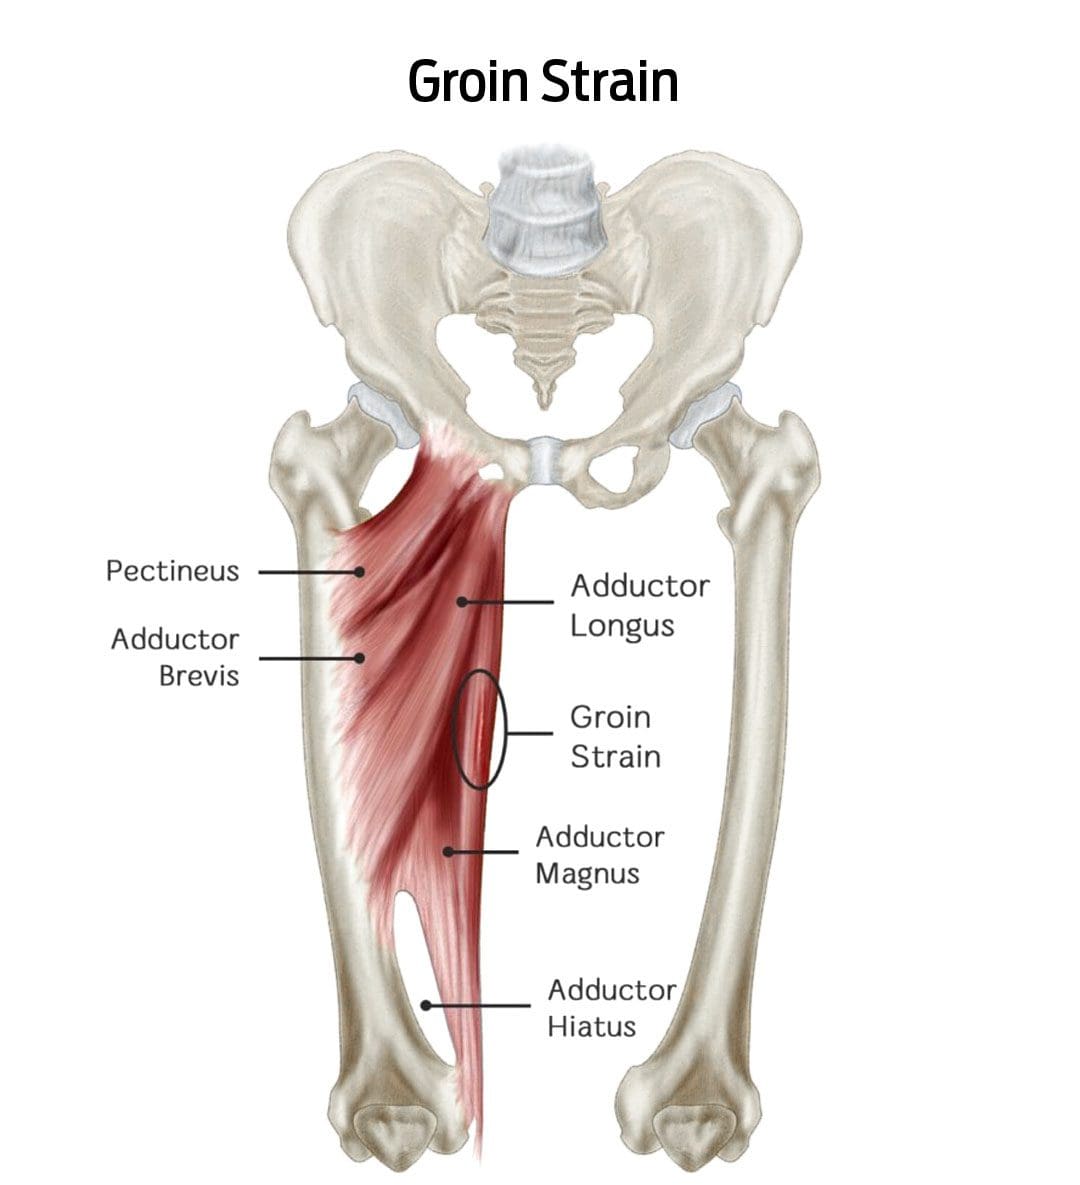 How to Recognize and Treat a Groin Strain Injury